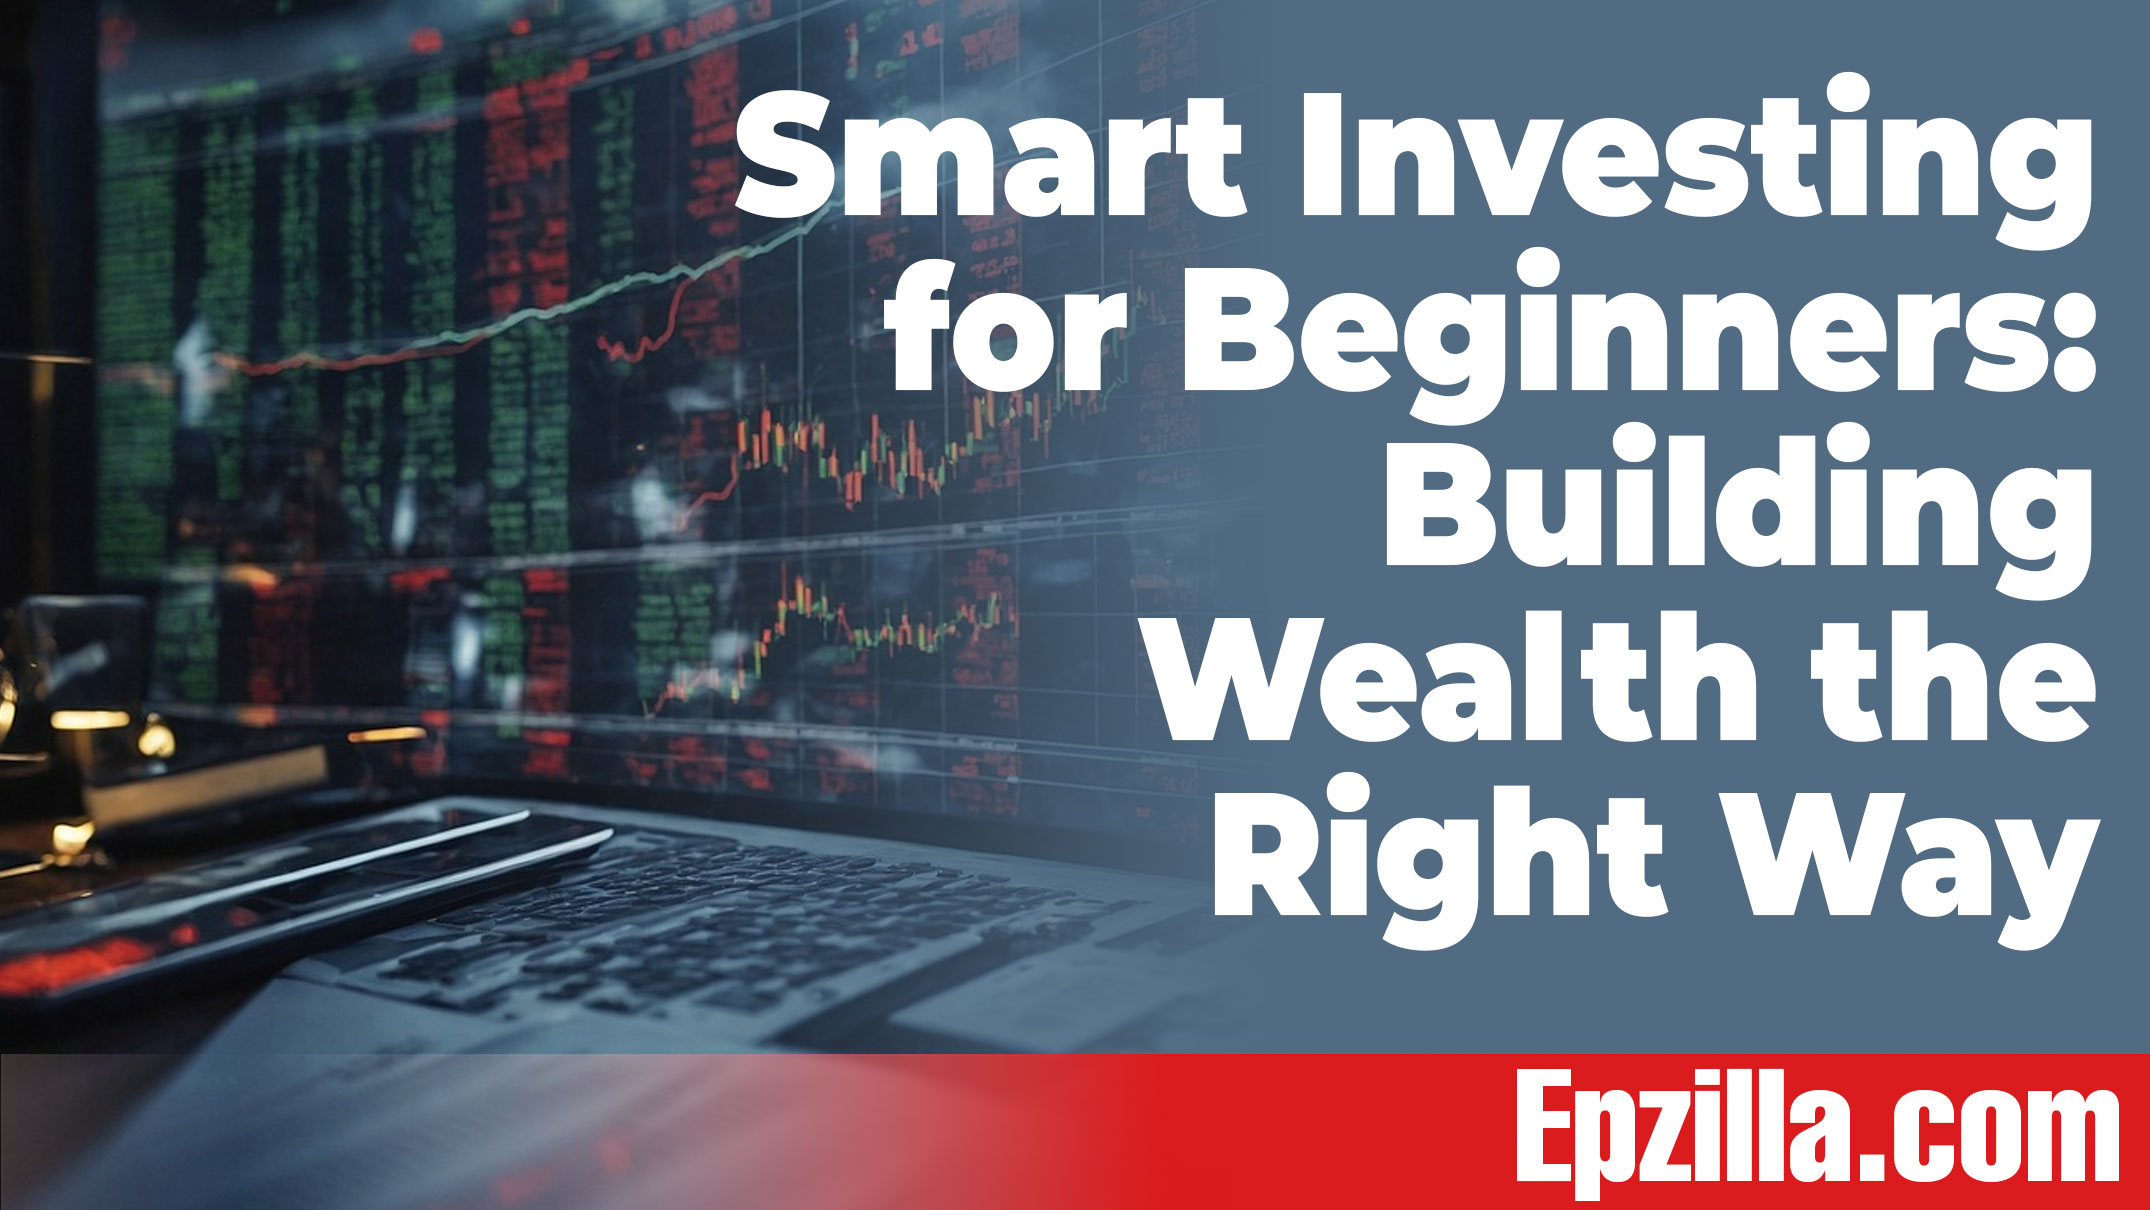 Smart Investing for Beginners: Building Wealth the Right Way Epzilla.com